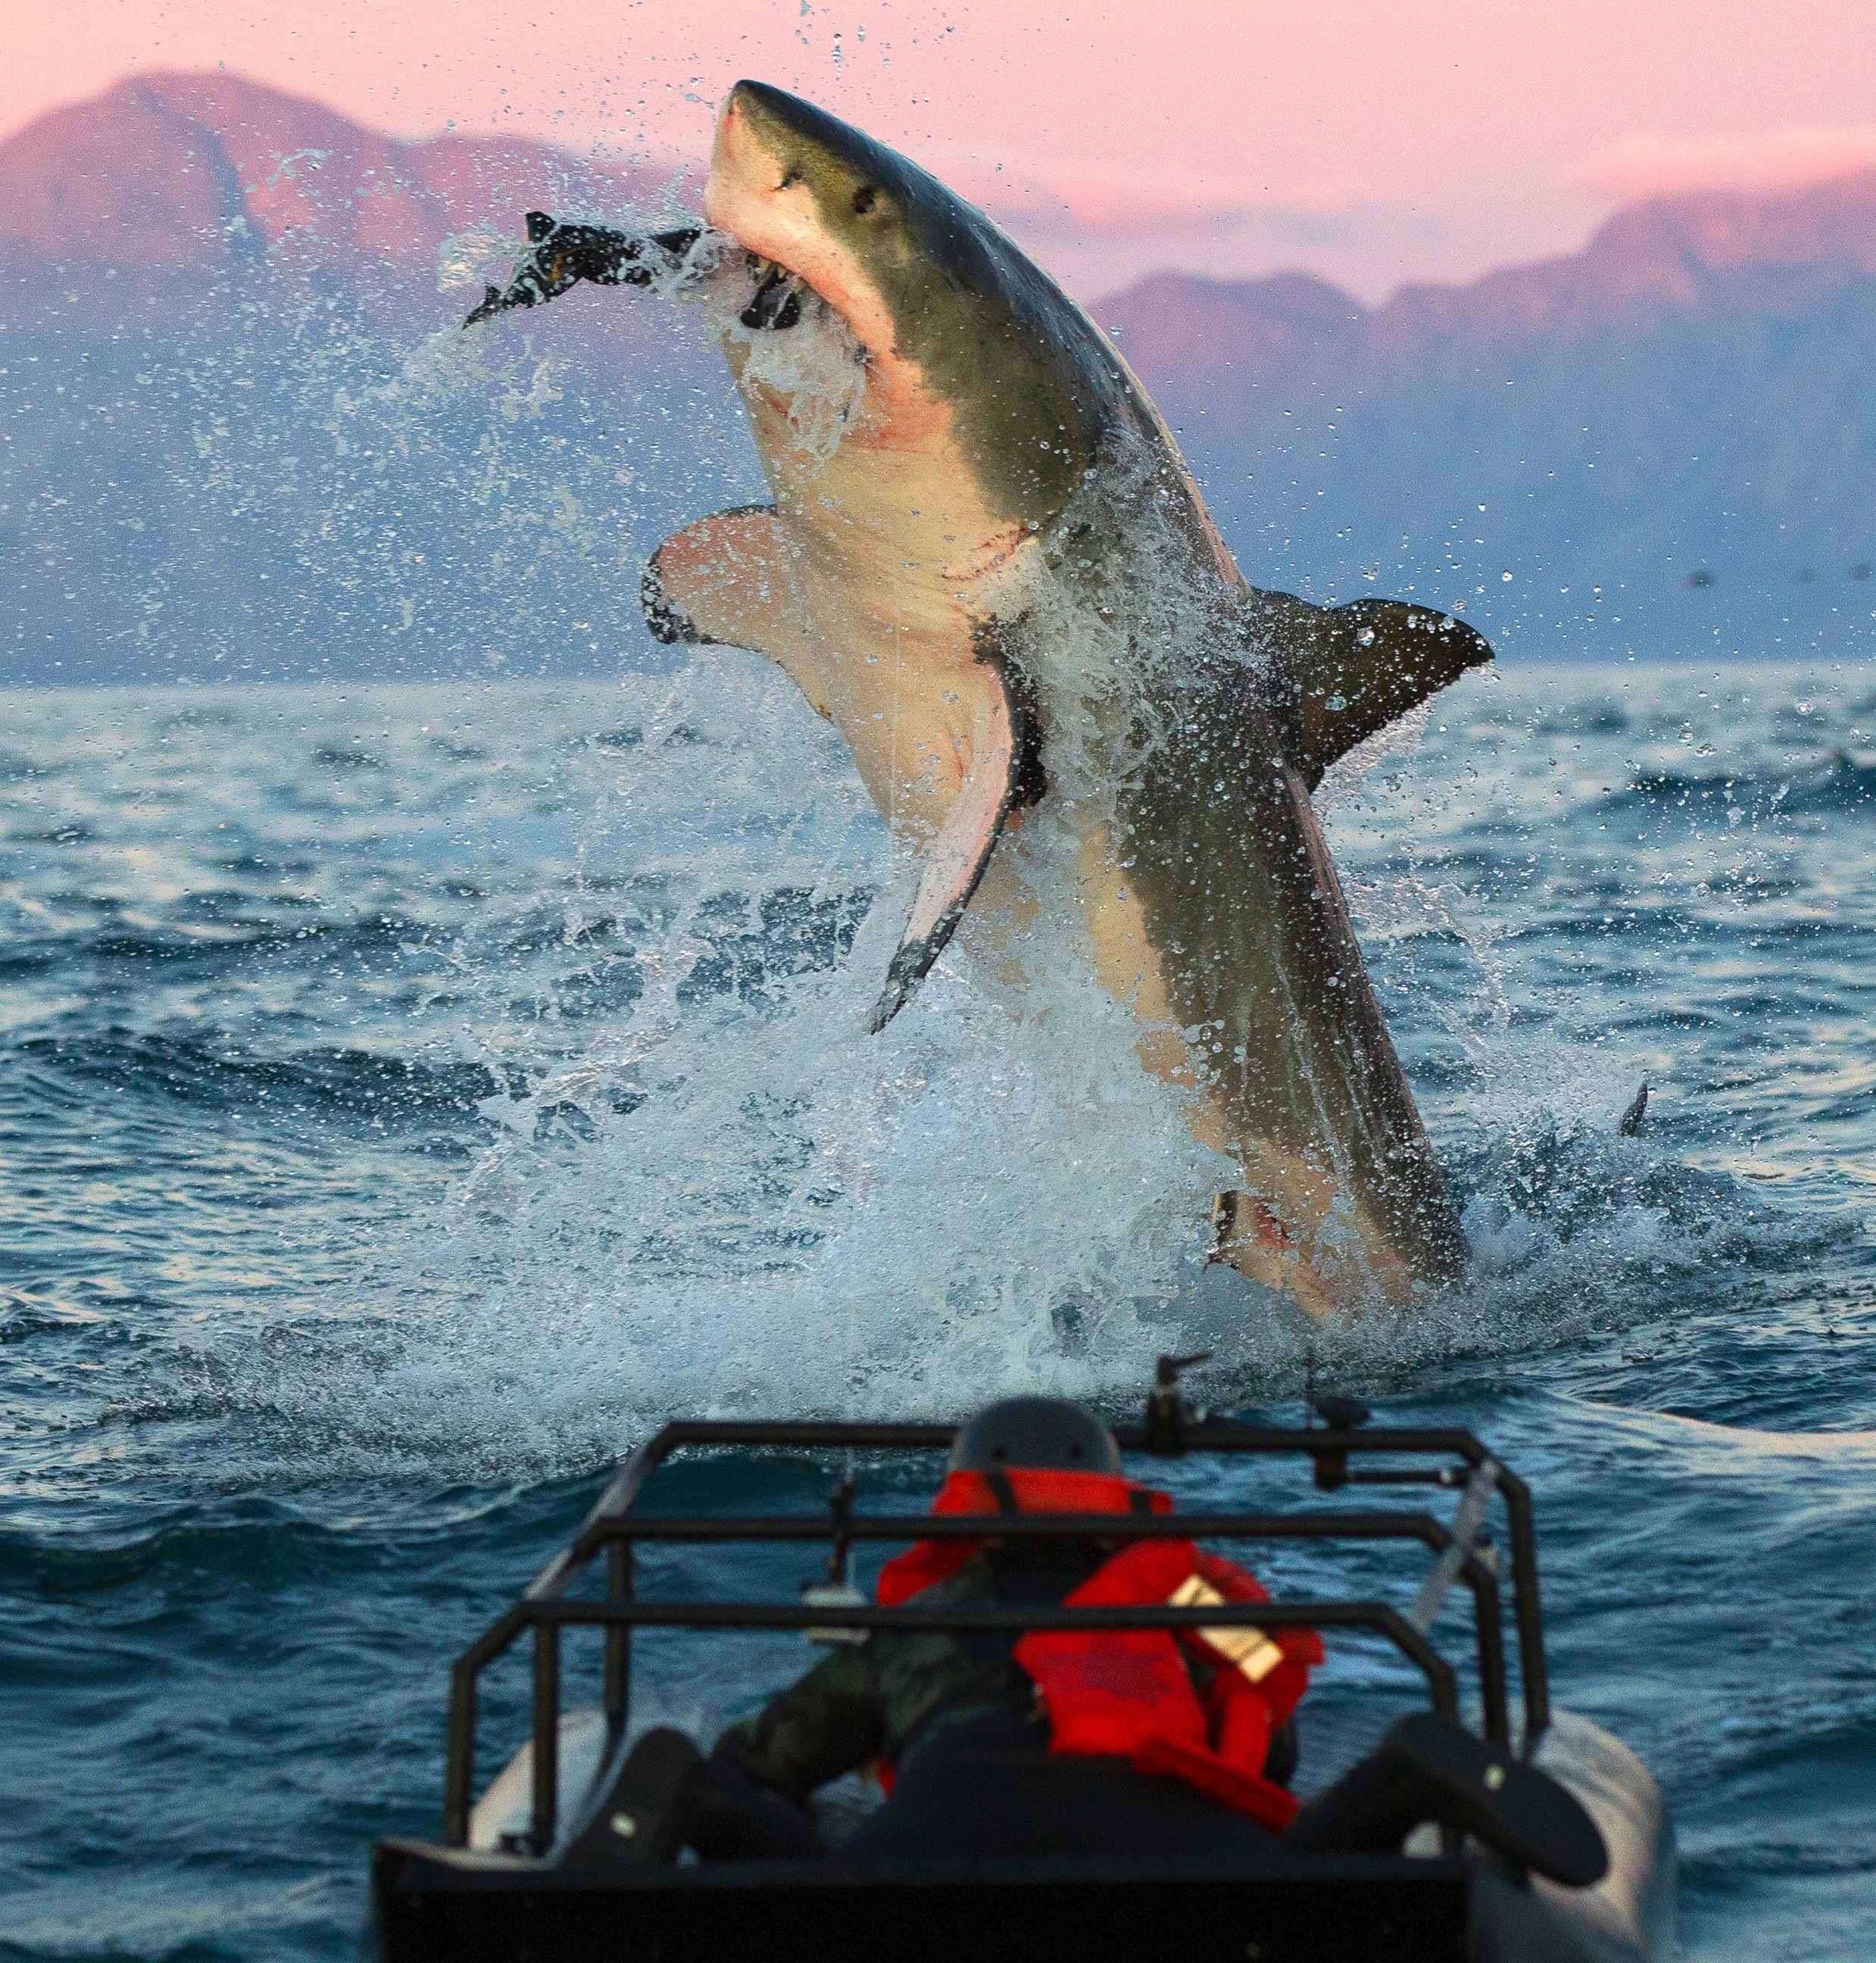 PHOTO: 30 million viewers watched "Shark Week" in 2013, making it the biggest audience yet.